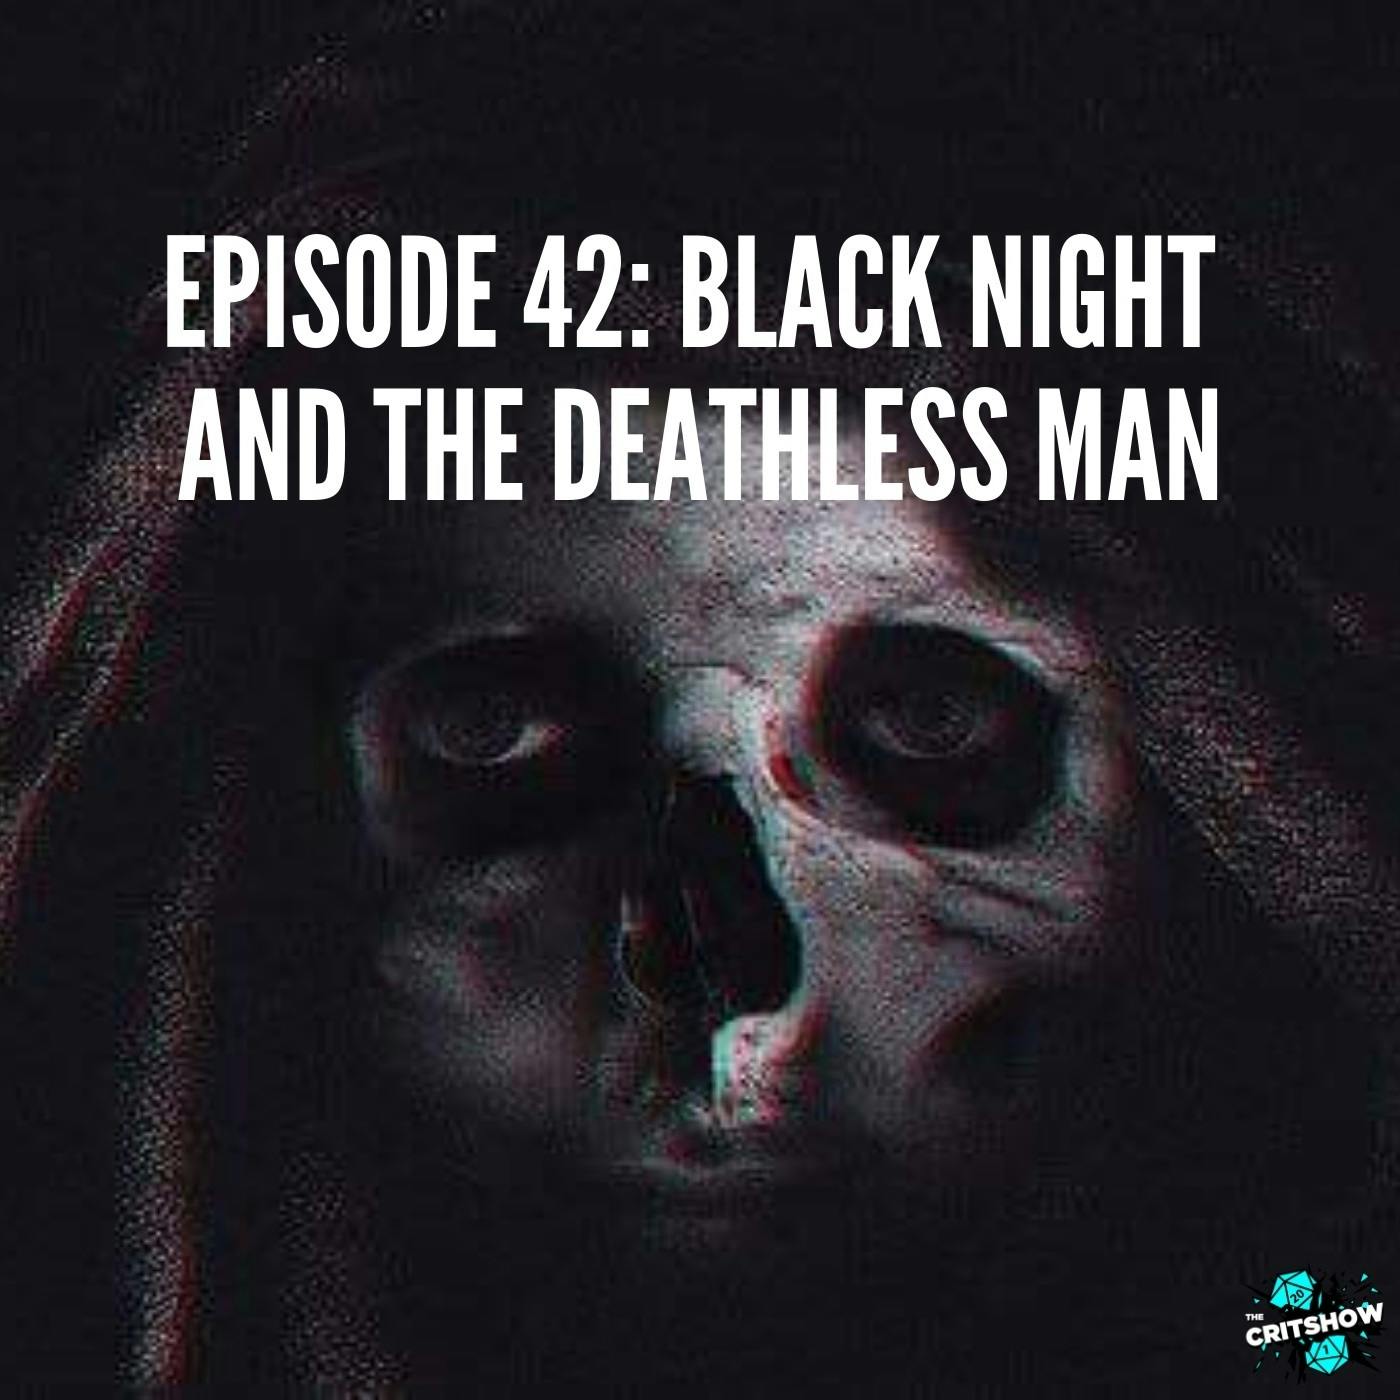 Black Night and the Deathless Man (S1, E42)